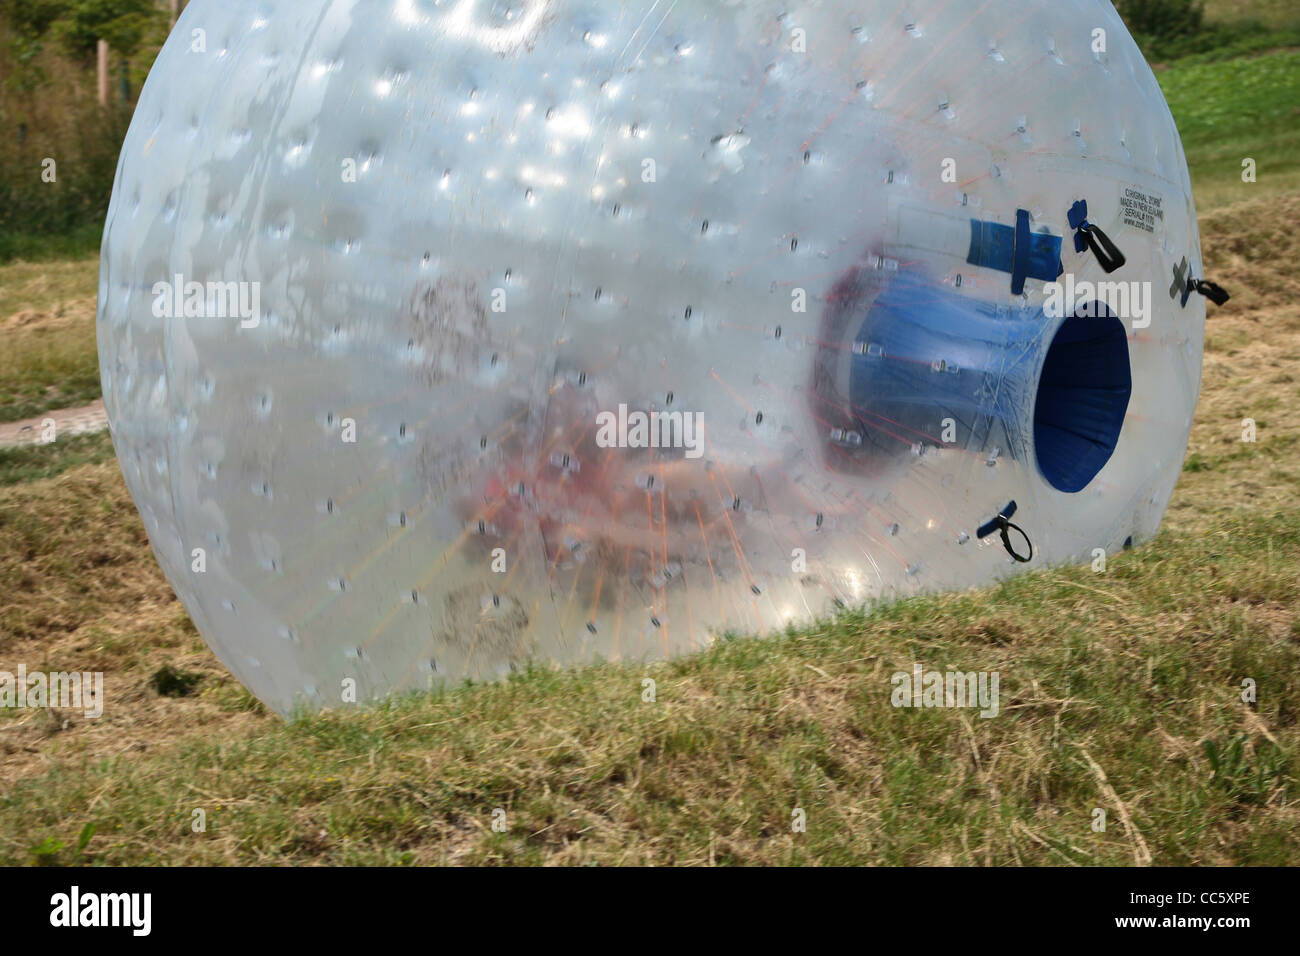 People enjoy Zorbing or Sphering on a hill in Dorset England. Stock Photo